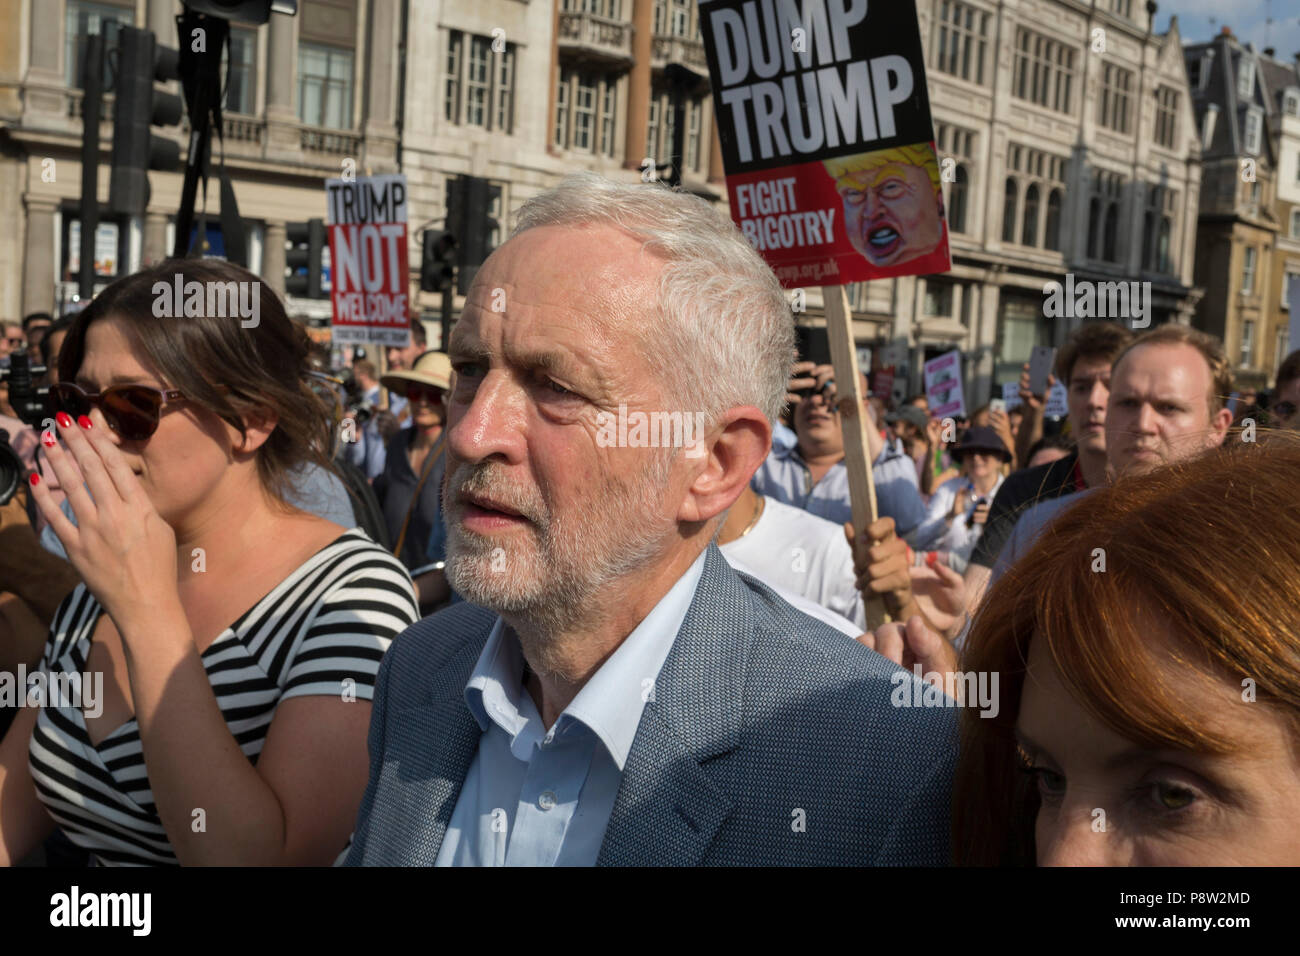 London, UK: Labour leader Jeremy Corbyn joins protesters against the visit of US President Donald Trump to the UK, who marched through central London, on 13th July 2018, in London, England.  Photo by Richard Baker / Alamy Live News Stock Photo